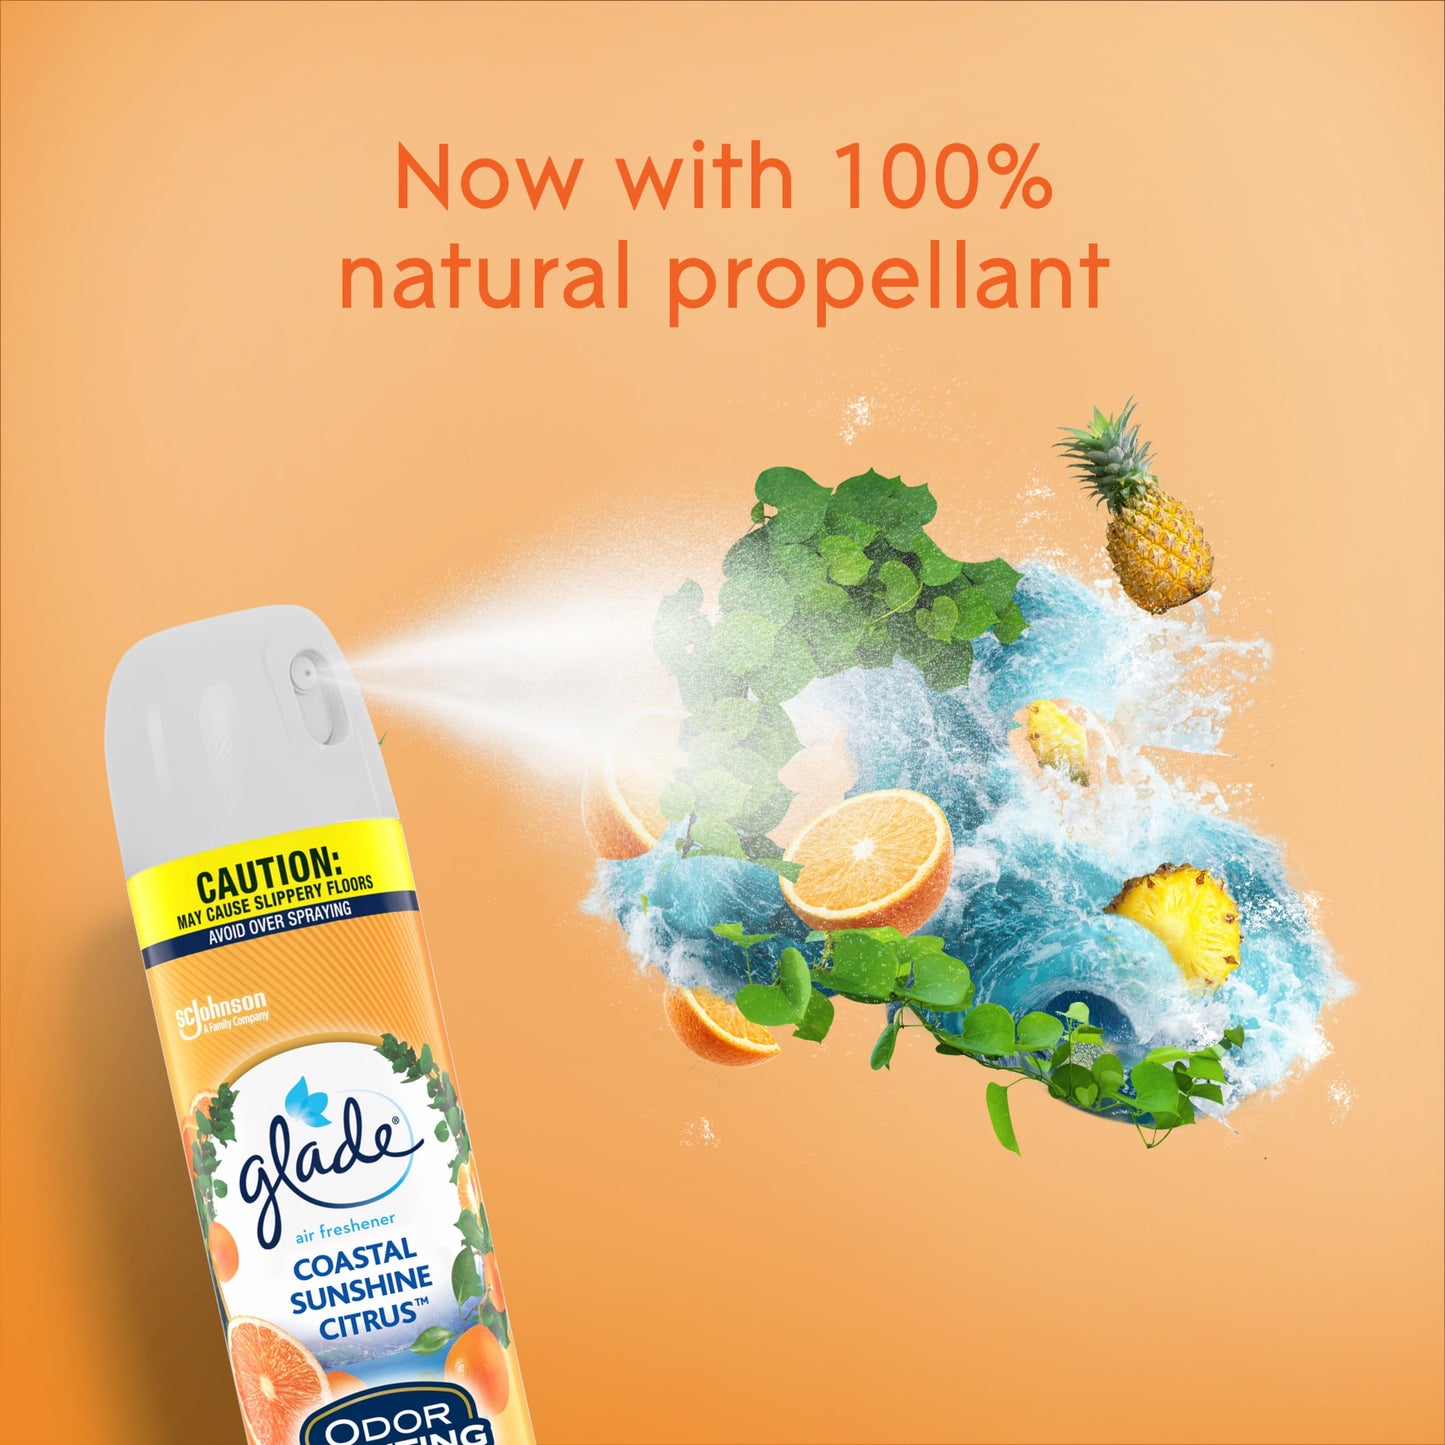 Glade Aerosol Spray, Air Freshener for Home, Coastal Sunshine Citrus Scent, Fragrance Infused with Essential Oils, Invigorating and Refreshing, with 100% Natural Propellent, 8.3 oz